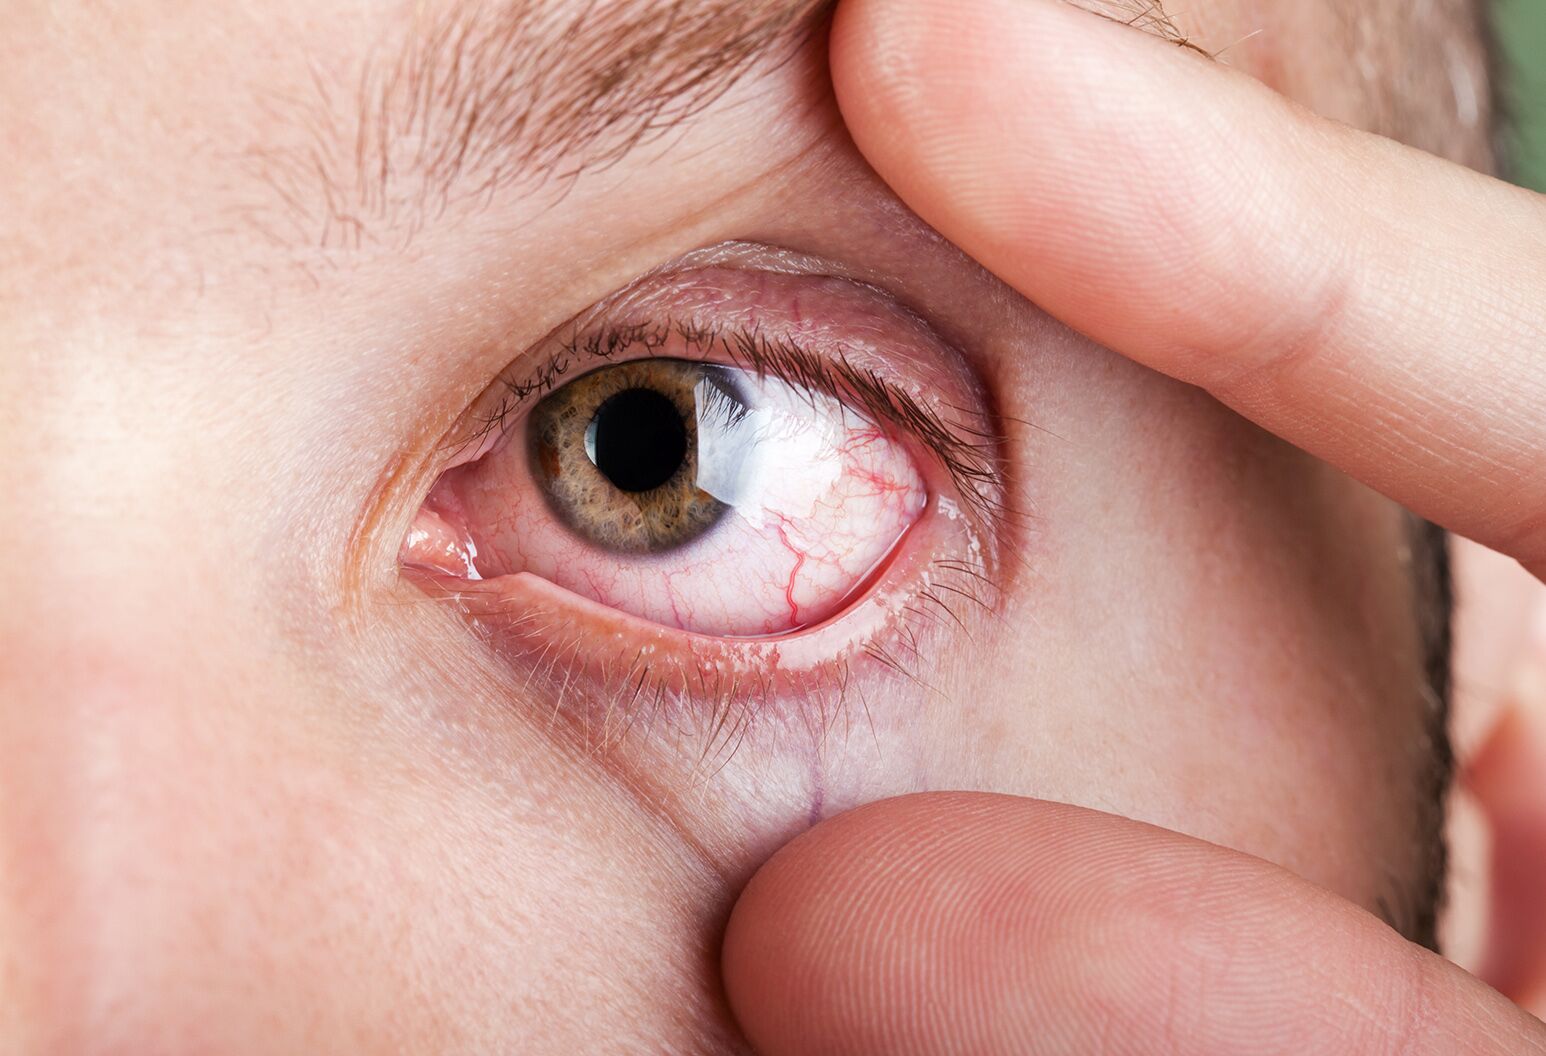 7 health problems predicted with a look into your eyes